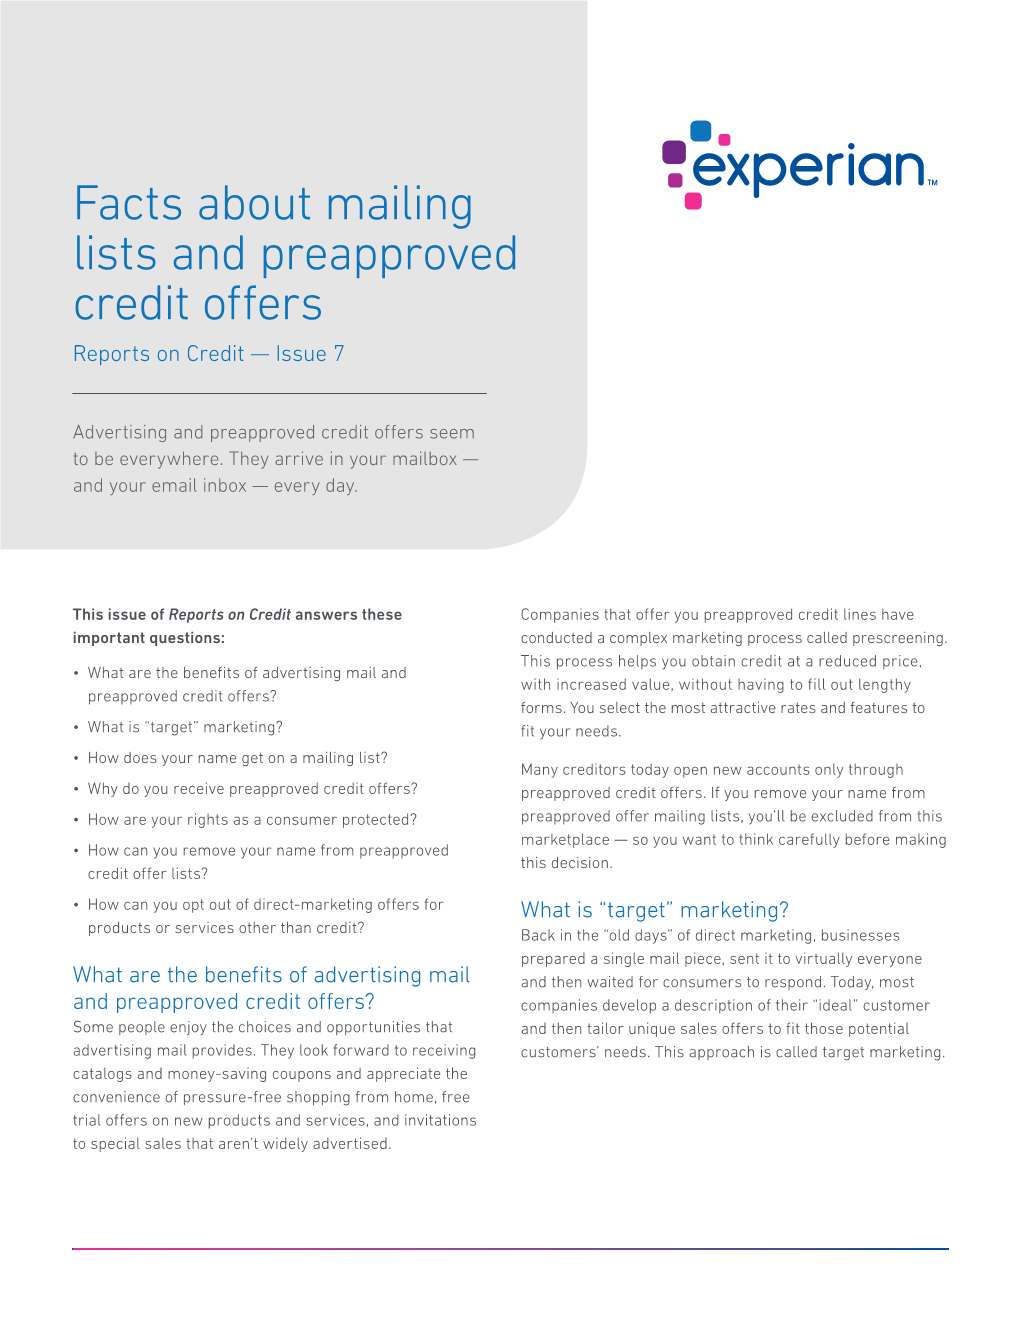 Facts About Mailing Lists and Preapproved Credit Offers Reports on Credit — Issue 7